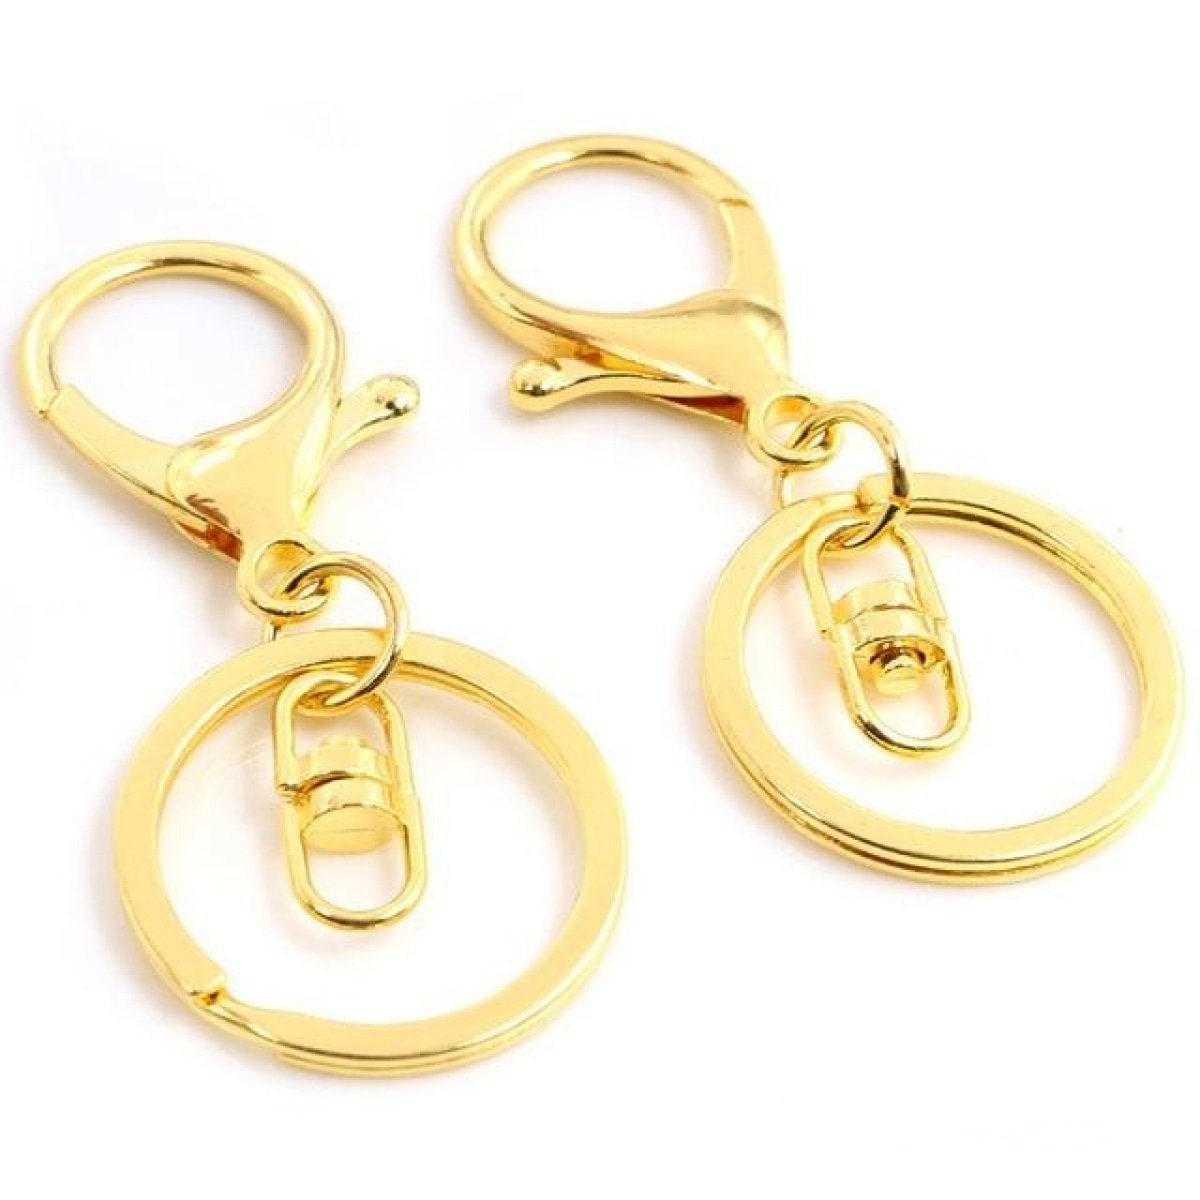 5Pcs 30Mm Key Ring Long 70Mm Plated Lobster Clasp Hook Chain Jewellery Making Keychain M1-28-Gold